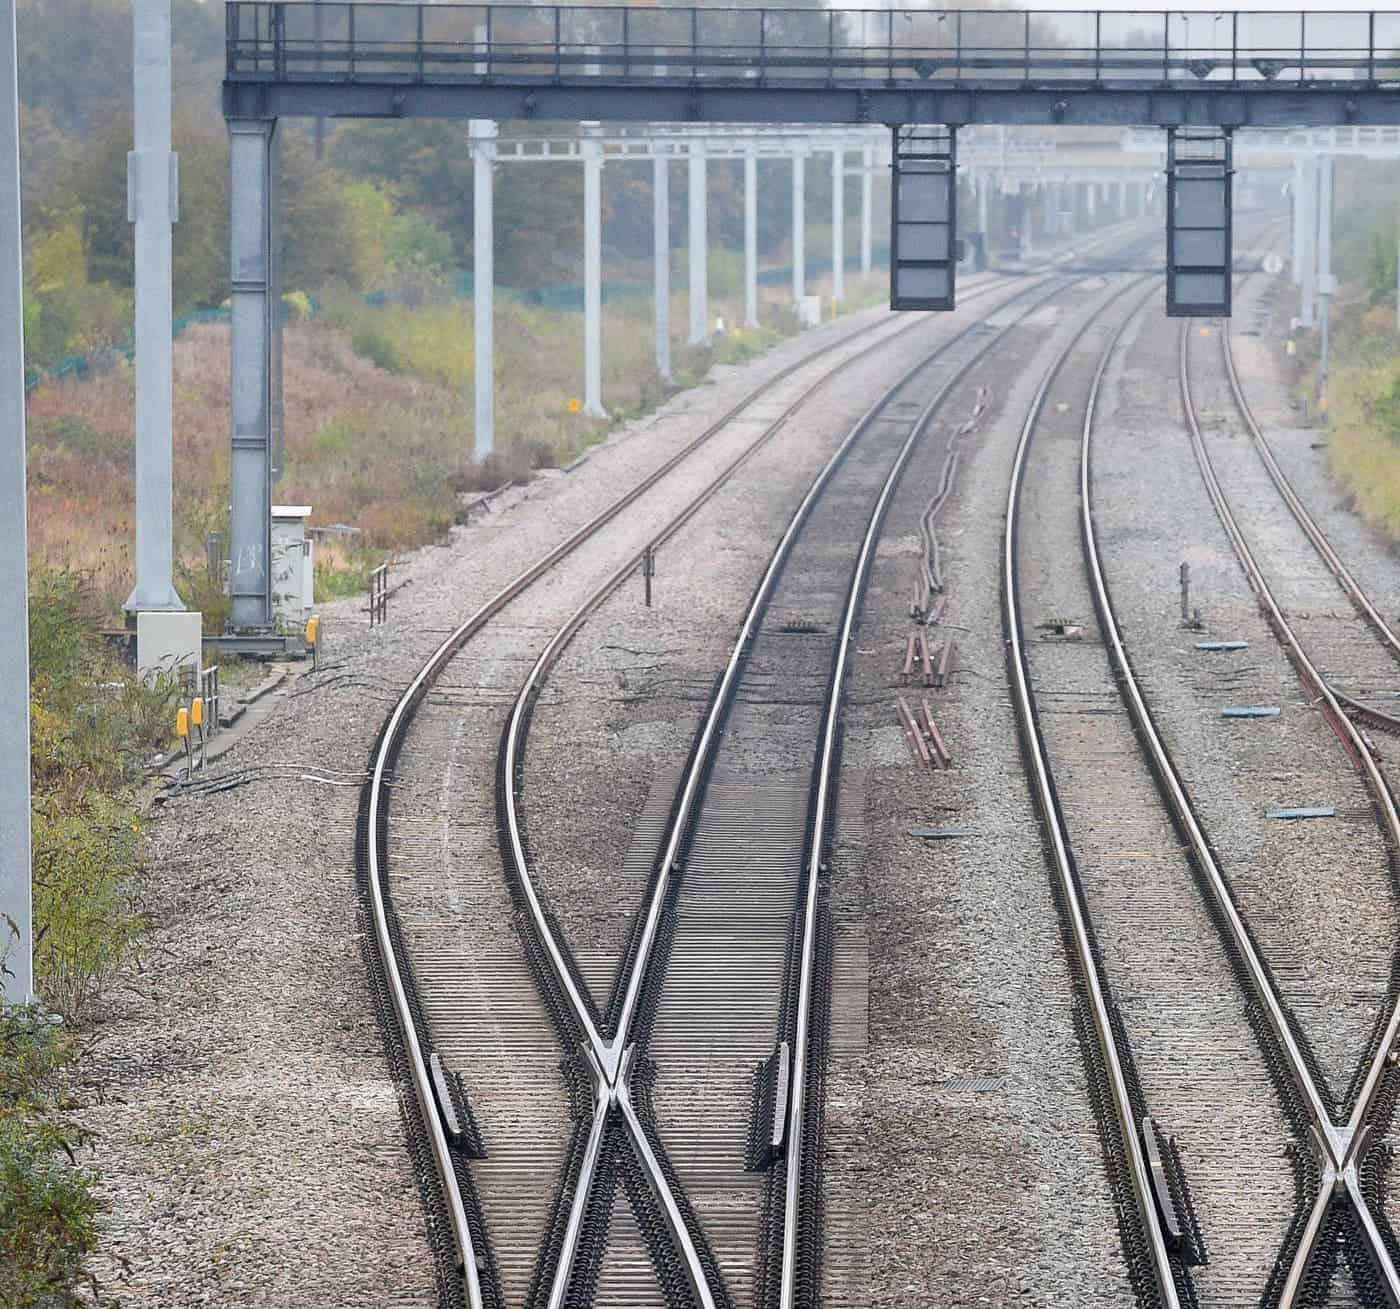 Rail chaos: Major operator cancels all services into London station until mid-Jan amid covid & strike action